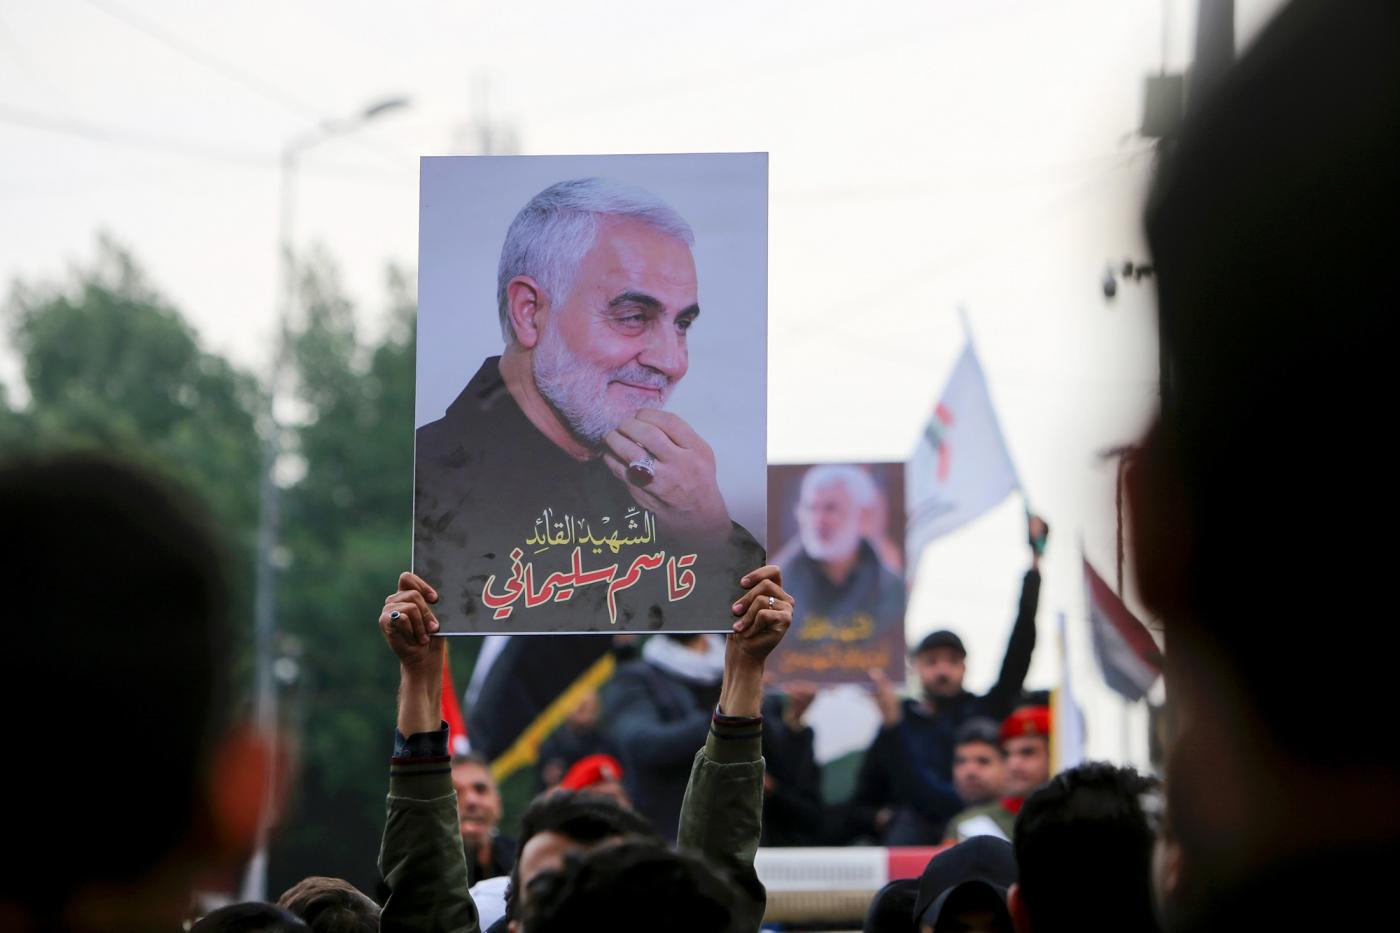 Mourners hold up pictures of General Qassem Soleimani at his funeral in January 2020.